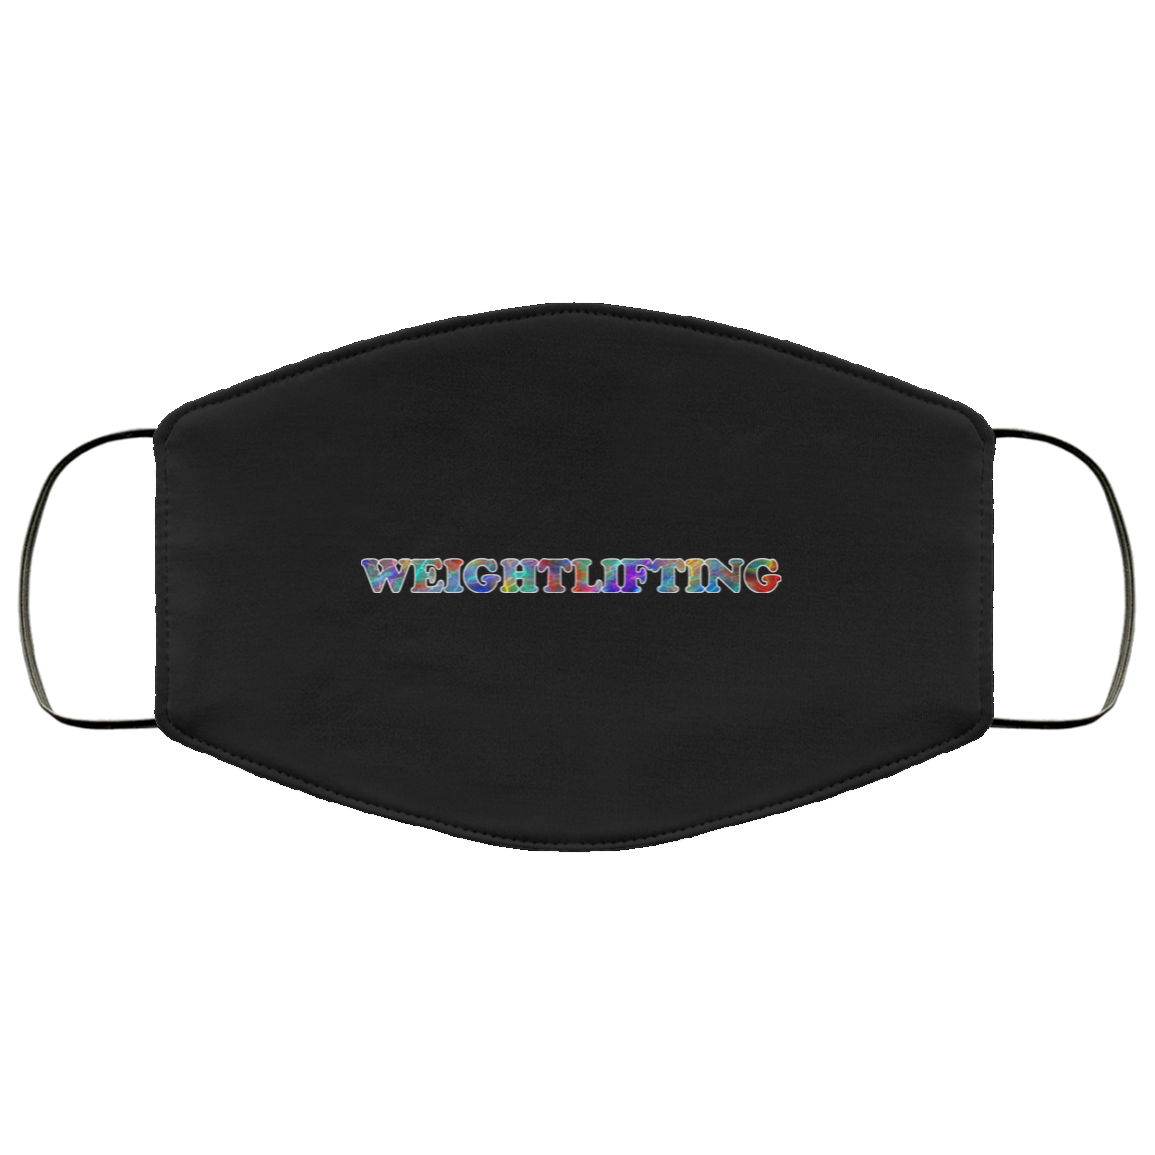 Weightlifting 2 Layer Protective Mask